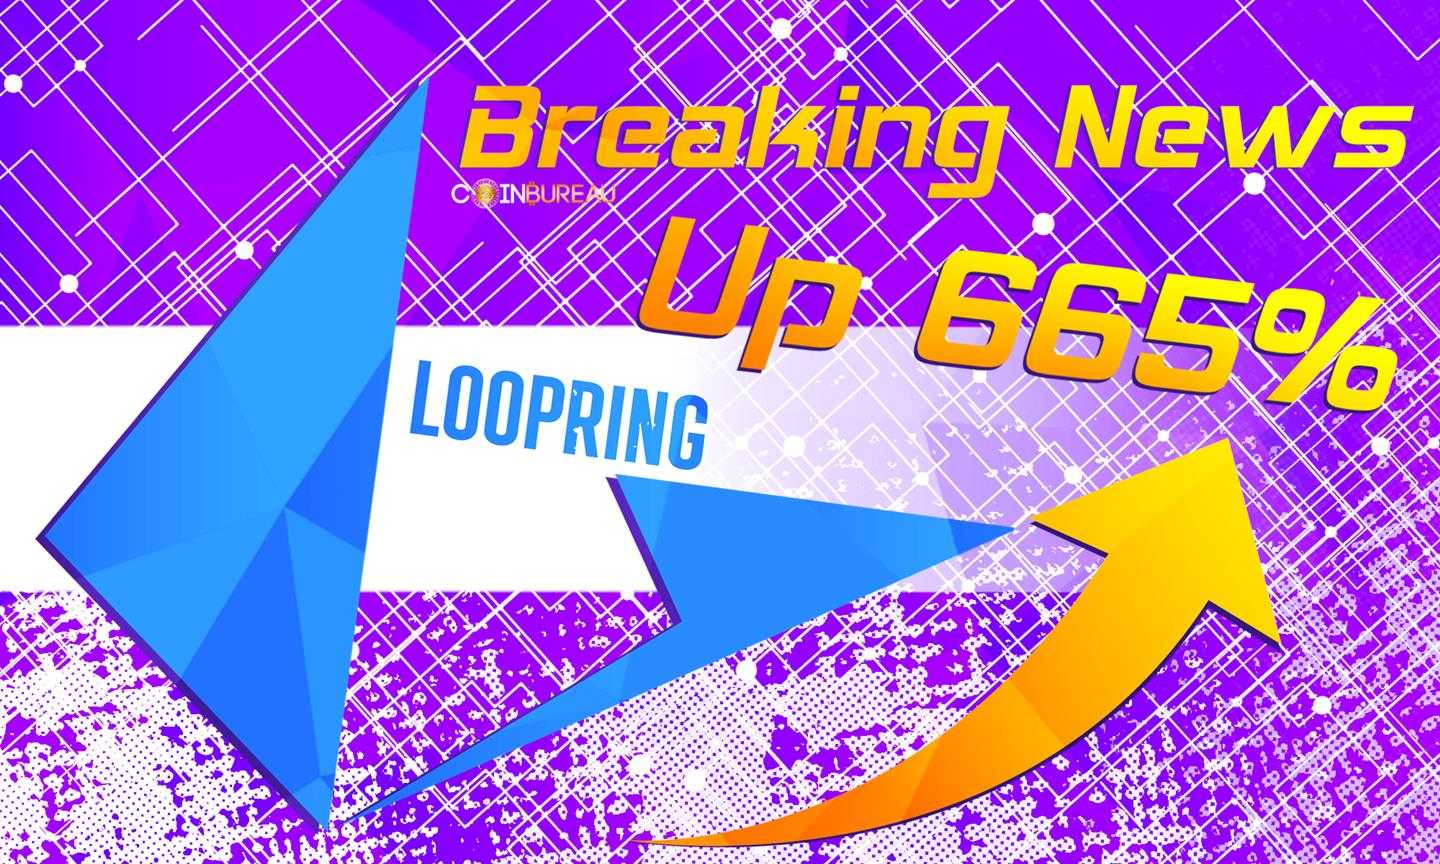 Loopring On Endless Tear, Up 755% In Less Than Two Weeks